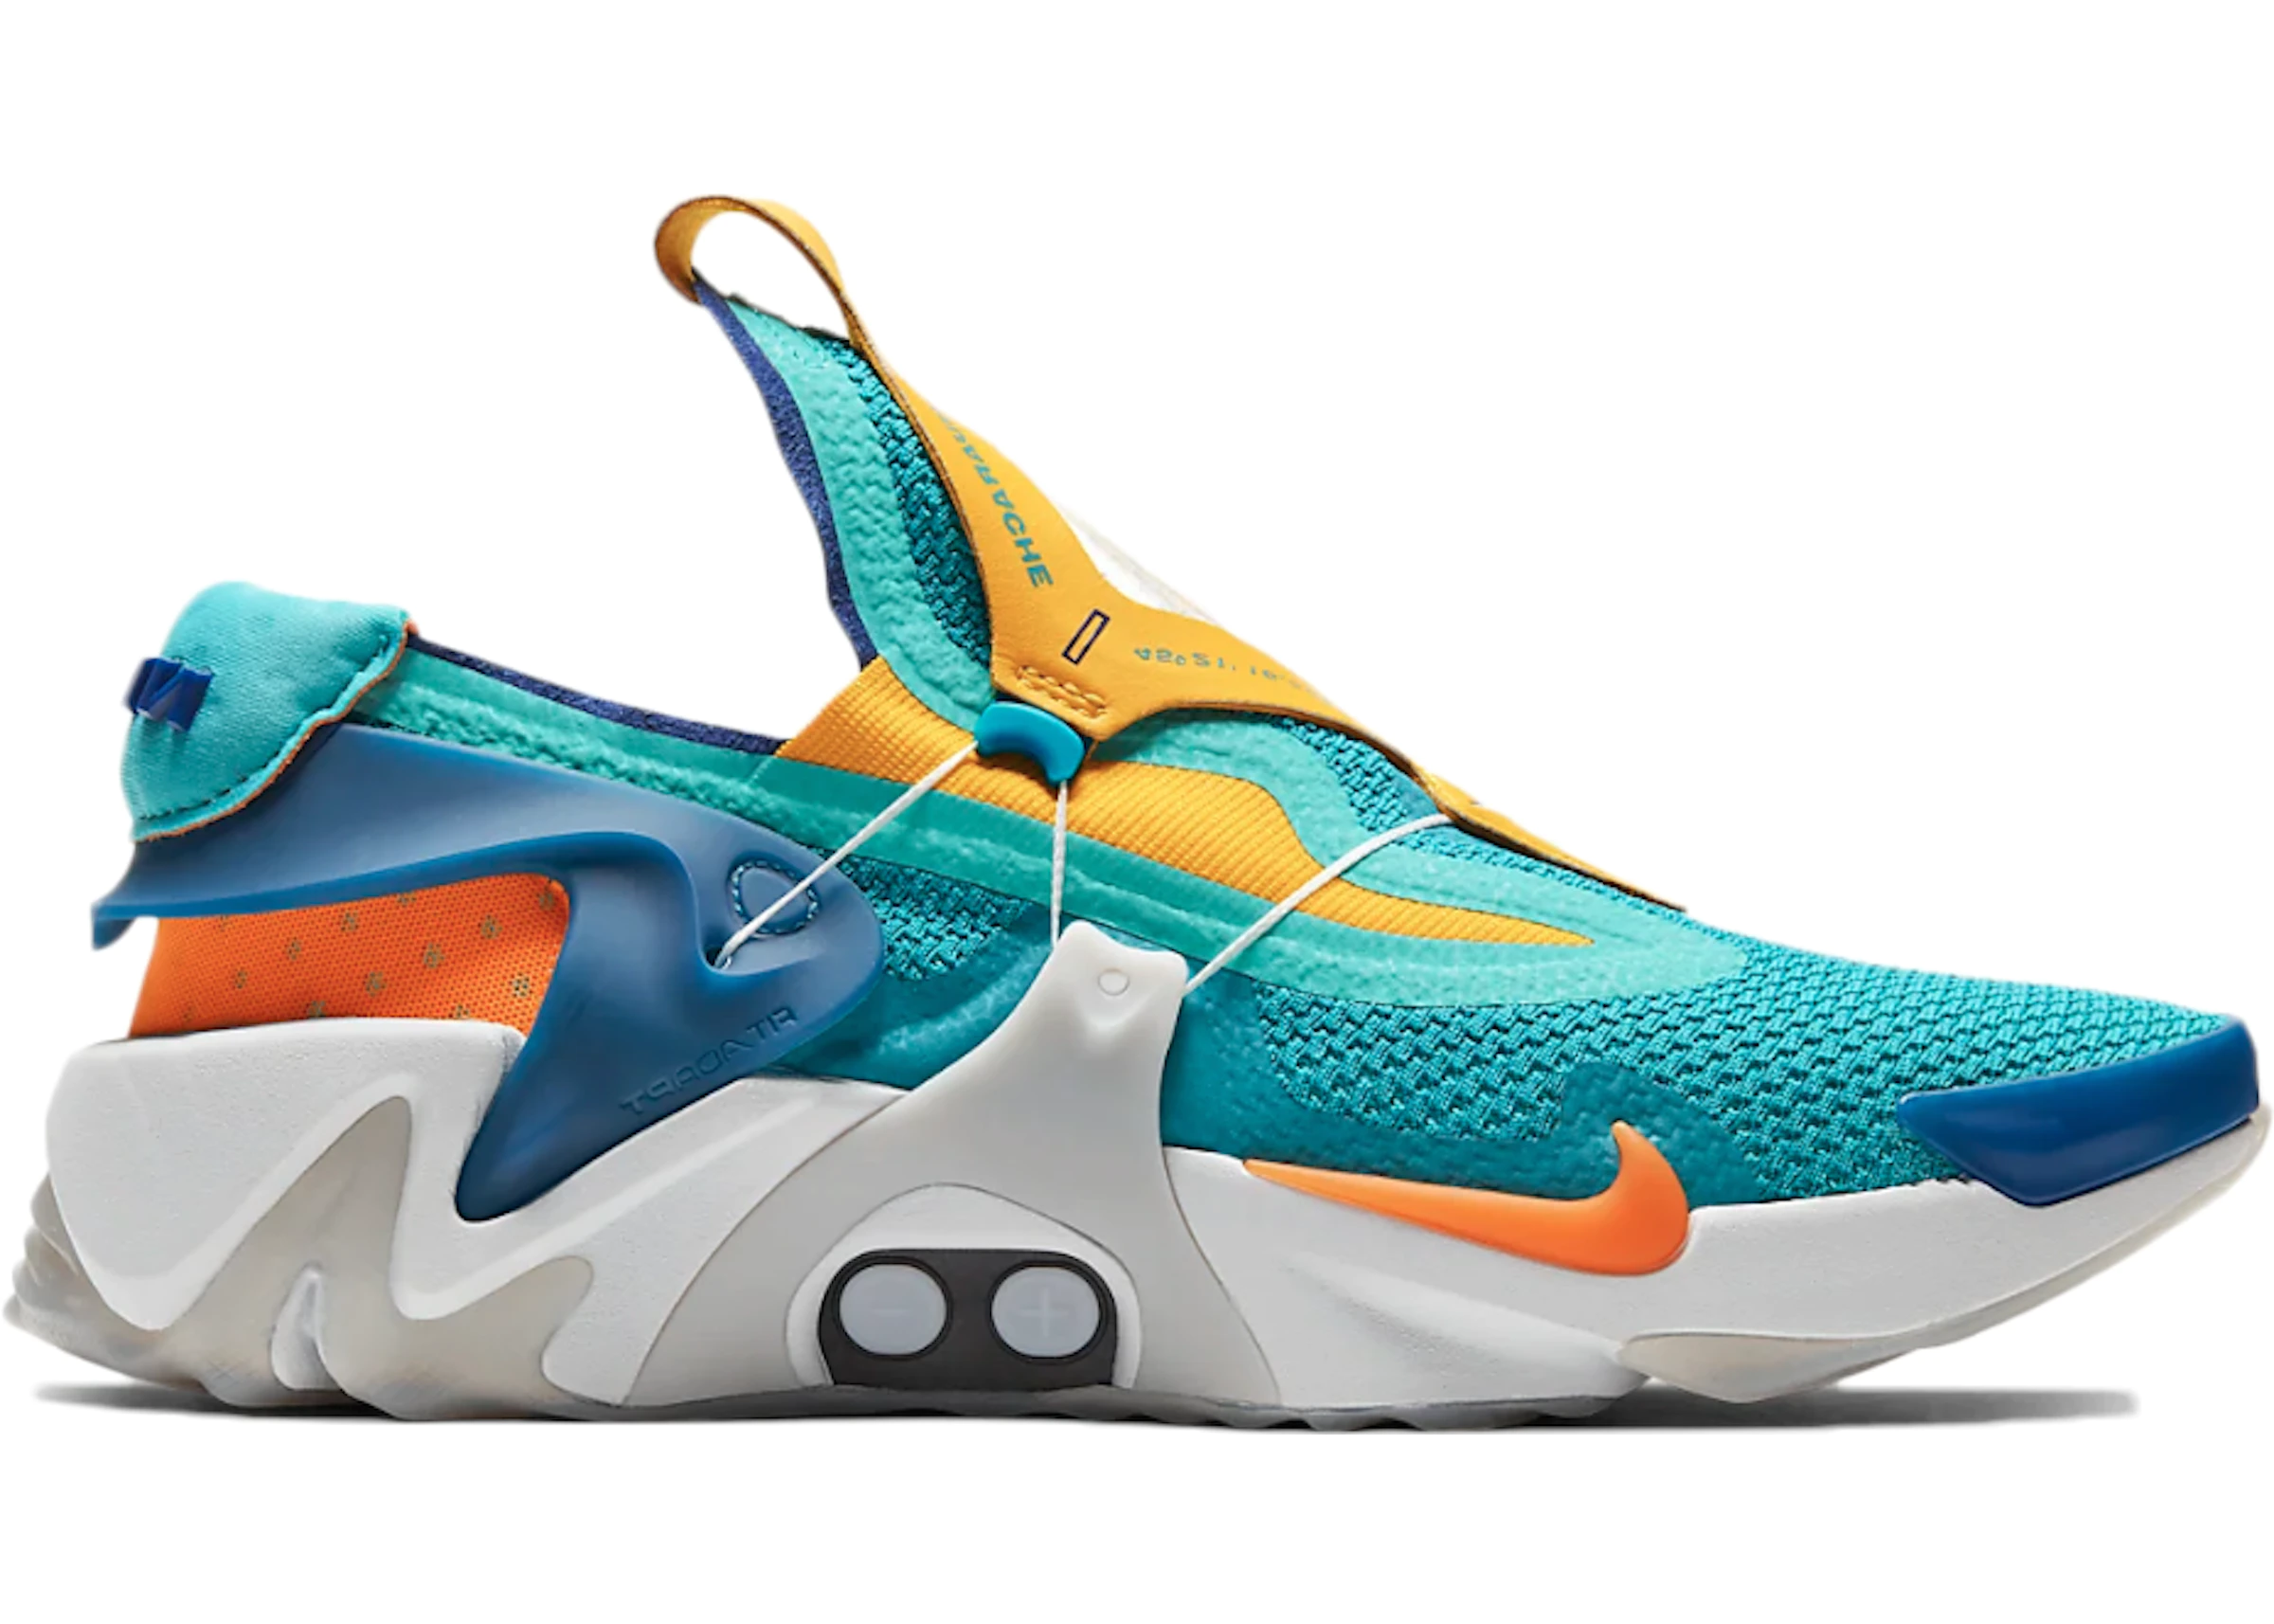 In the mercy of Penelope Marked Nike Adapt Huarache Hyper Jade (UK Charger) - BV6397-300/CT4089-300 - GB